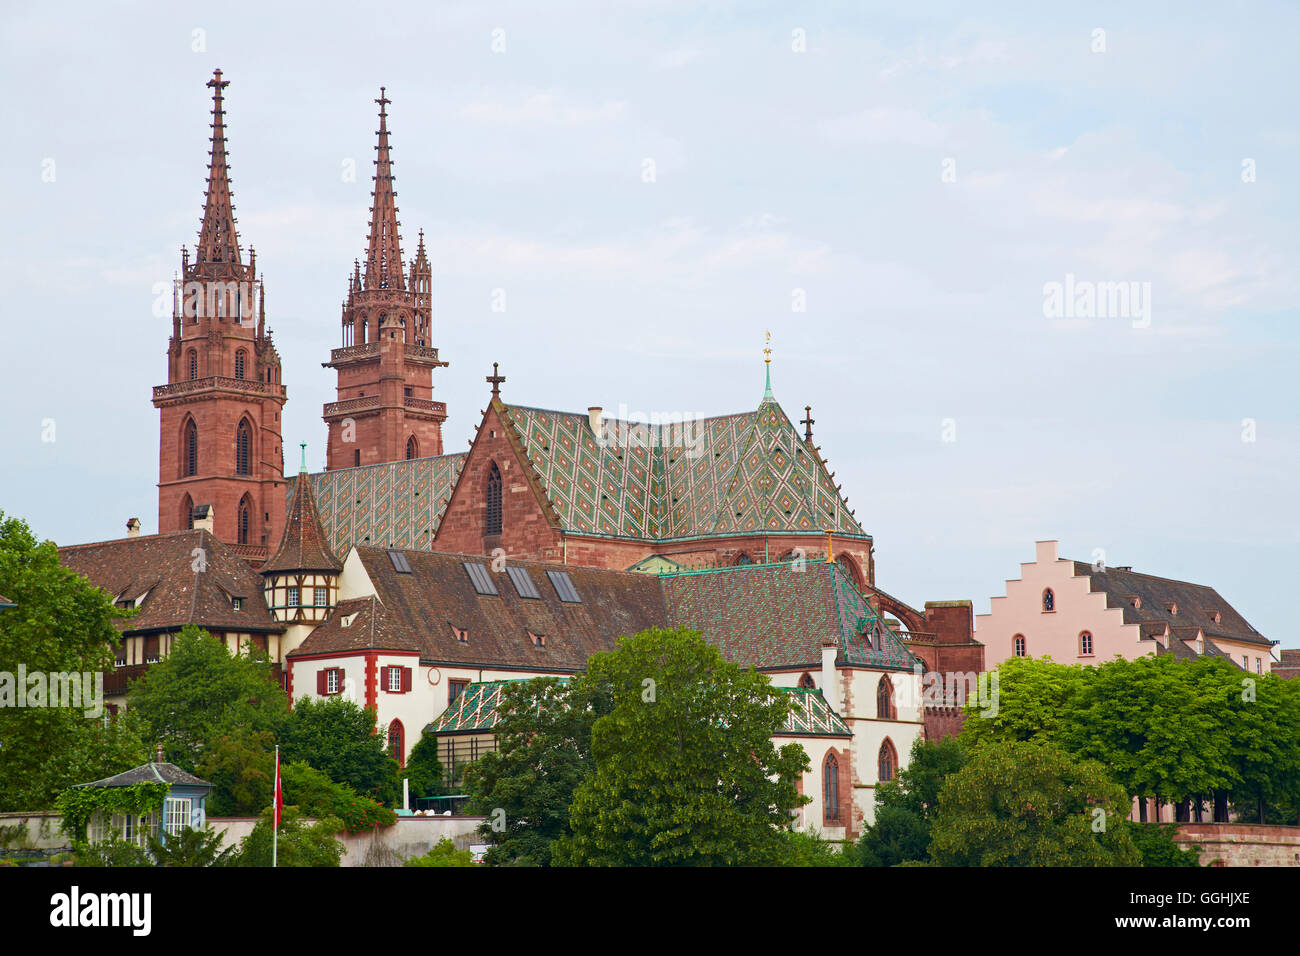 View over the river Rhine to the Minster, Basel, Switzerland, Europe Stock Photo